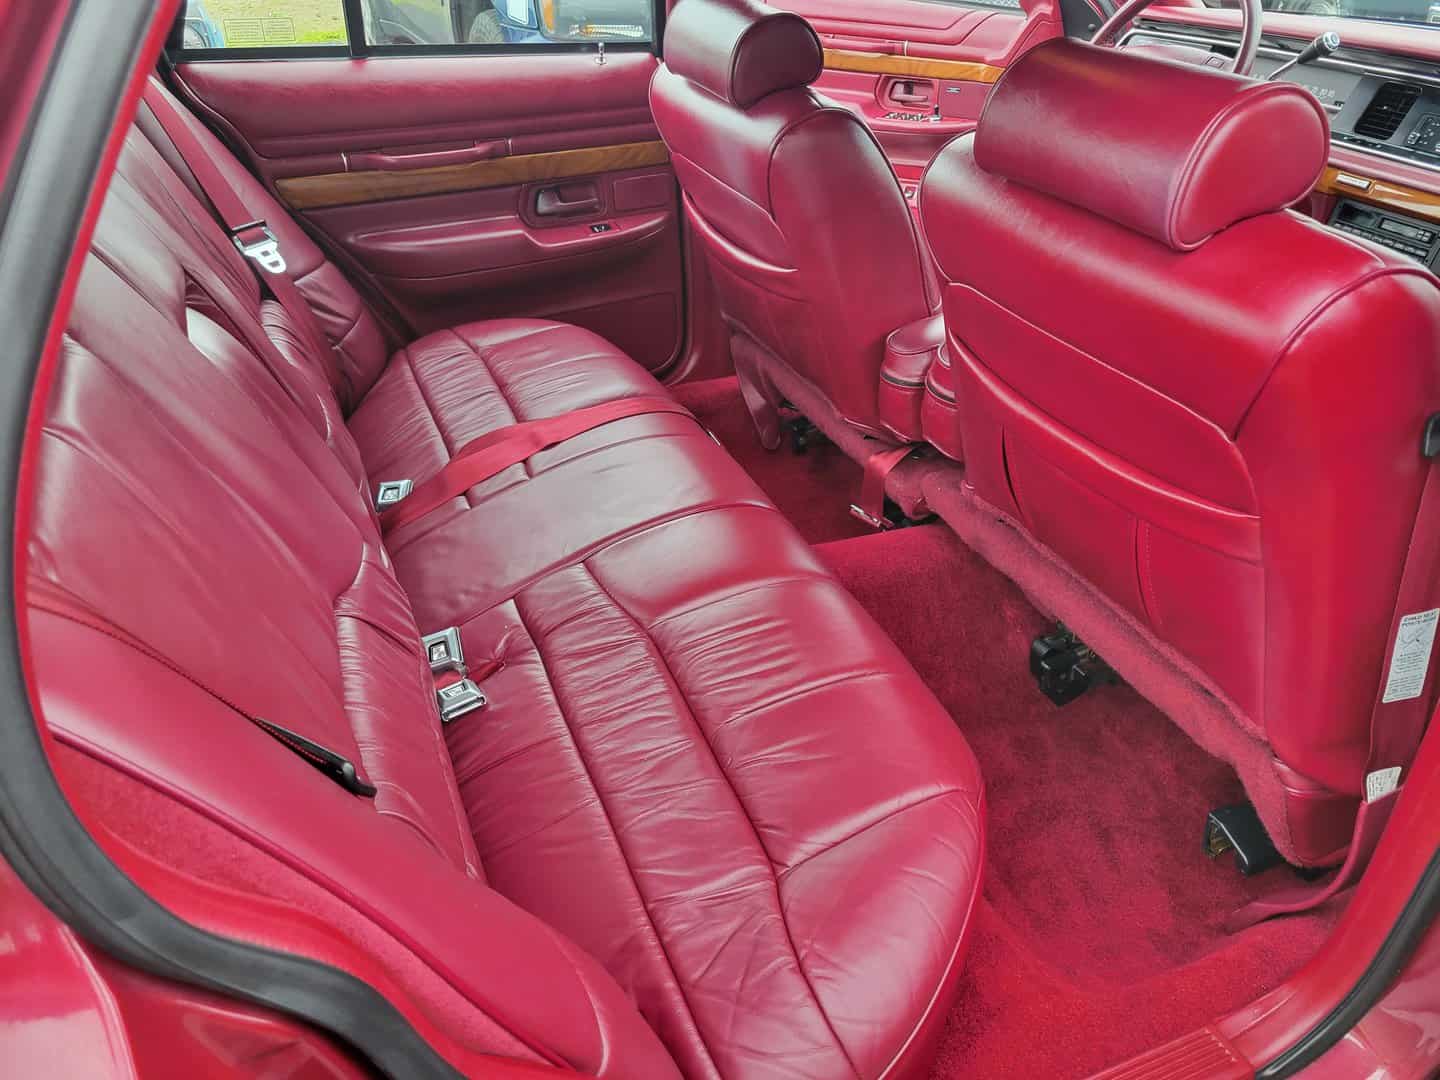 The interior of a red car with leather seats.